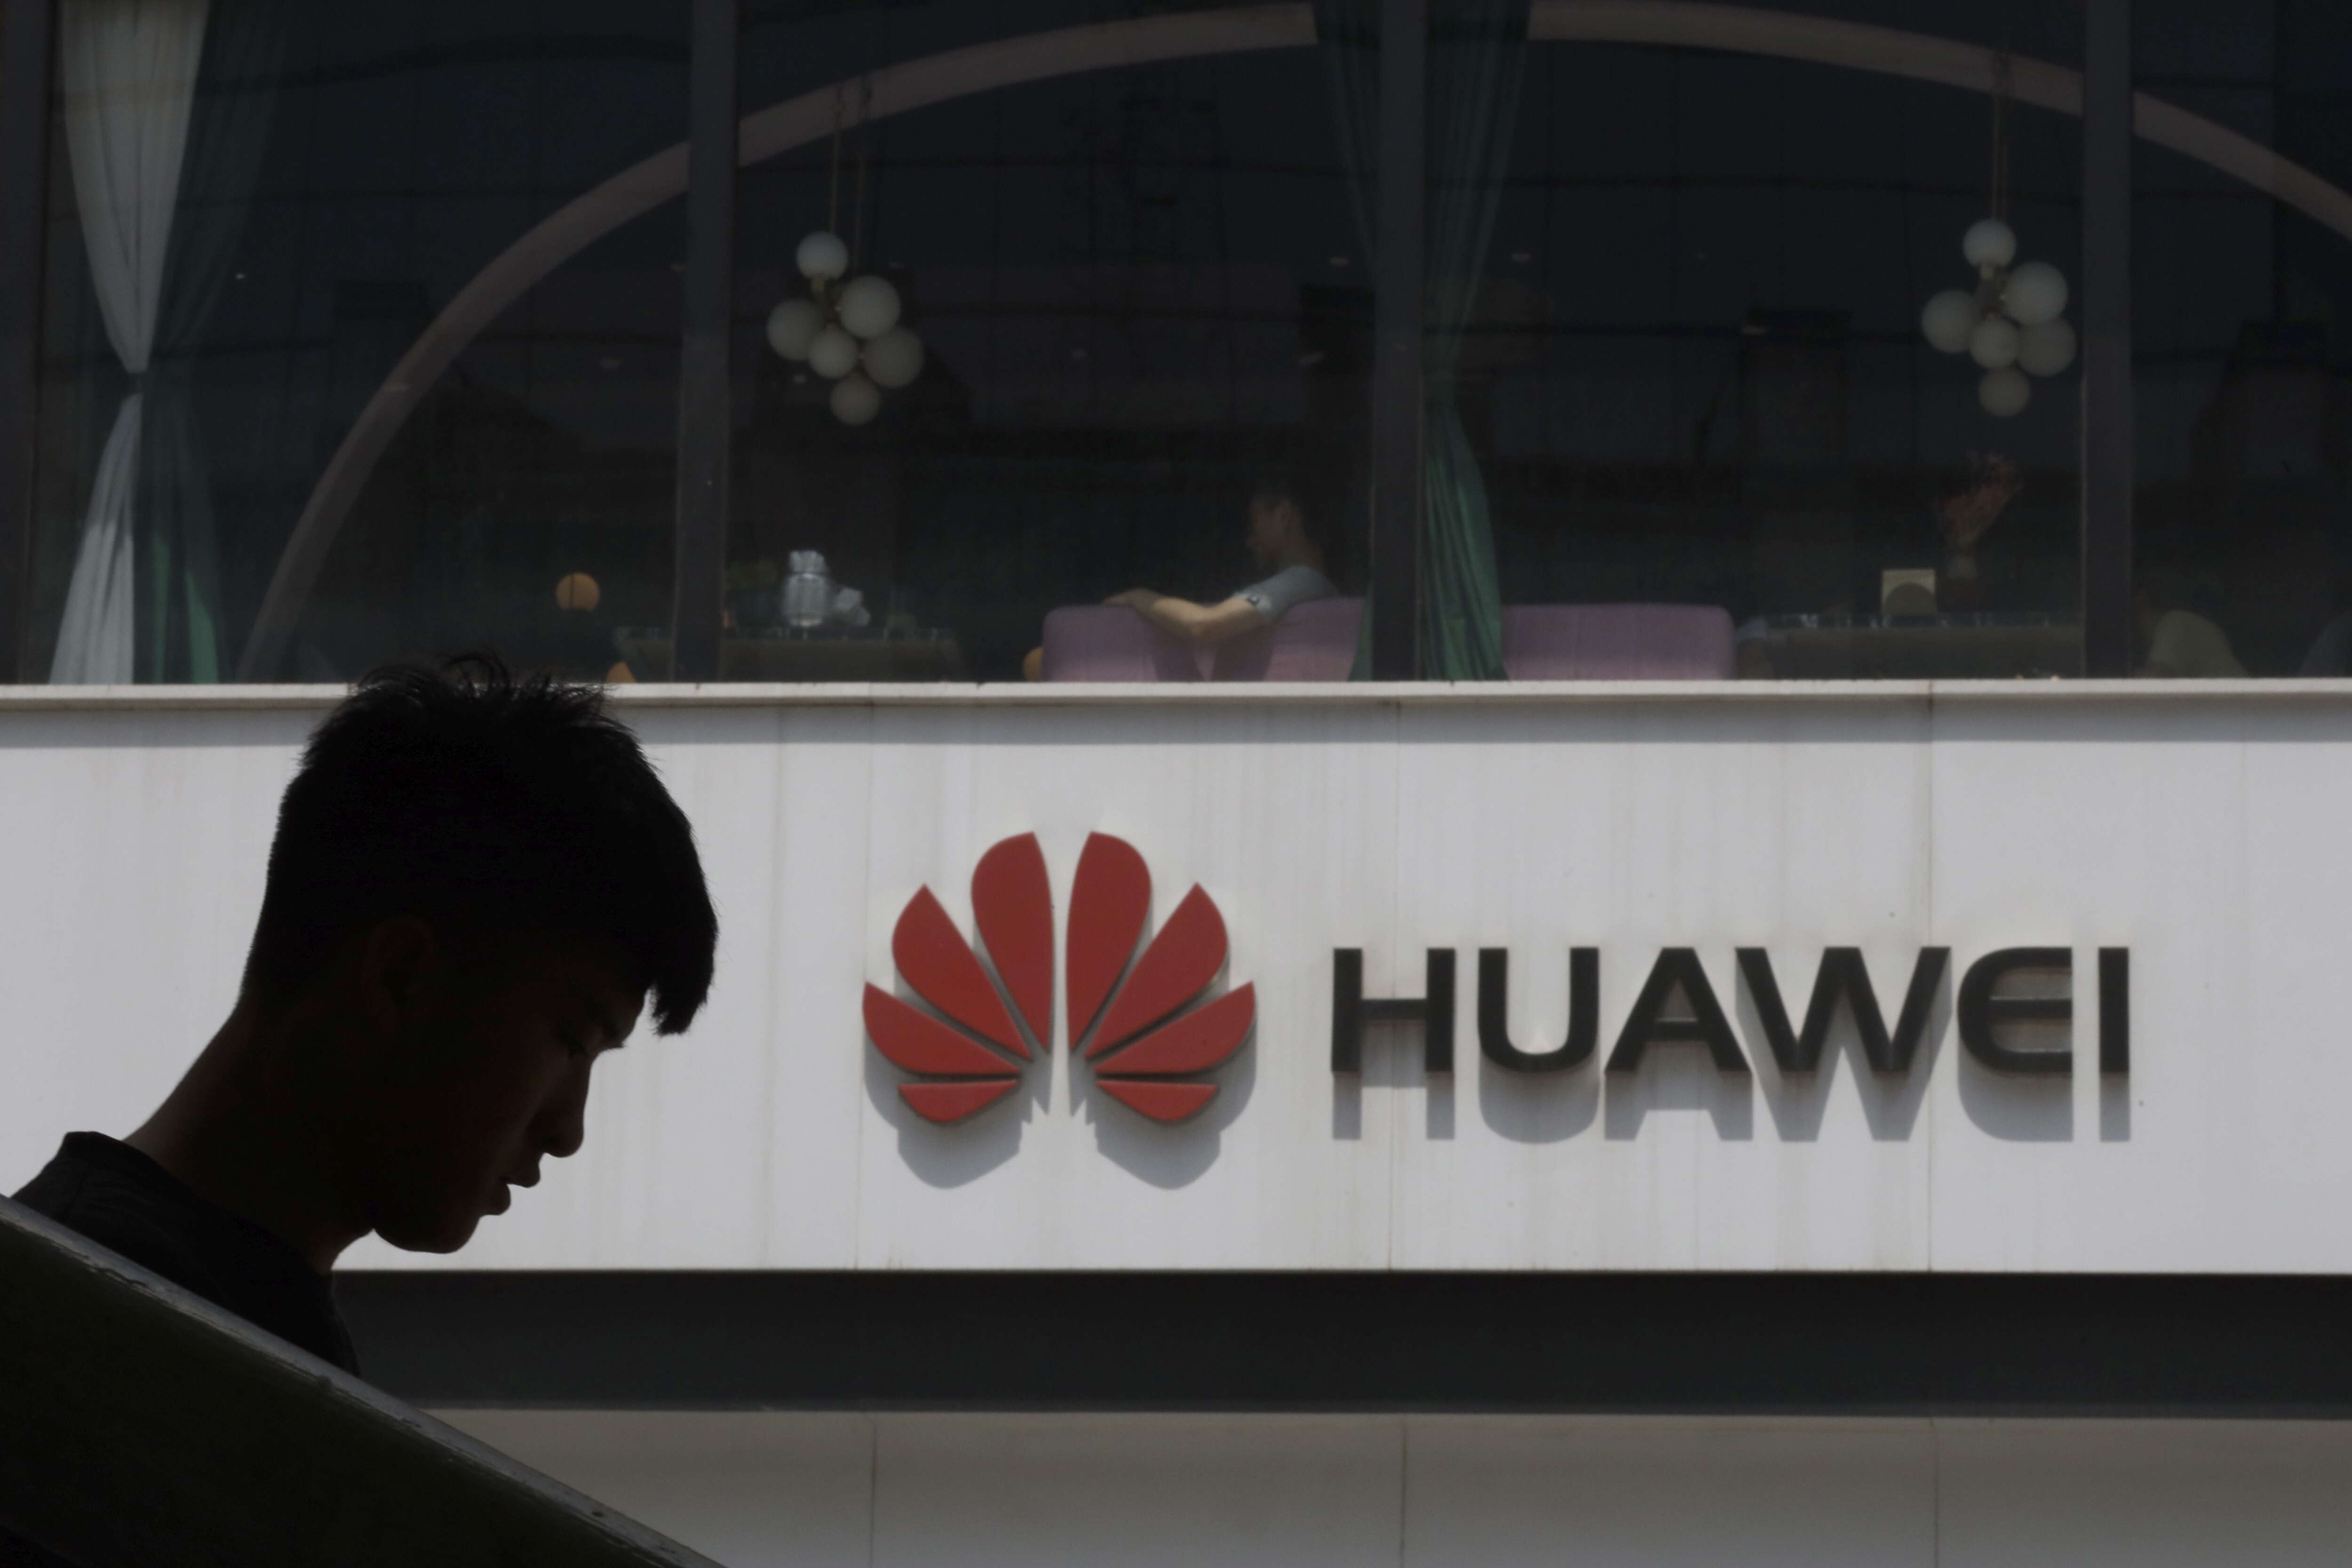 FILE - In this Thursday, May 16, 2019 file photo, a man is silhouetted near the Huawei logo in Beijing. Huawei took U.K. bank HSBC to court on Friday, Feb. 12, 2021 seeking documents the Chinese company says are key to its legal efforts to stop its chief financial officer from being extradited to the U.S. from Canada. (AP Photo/Ng Han Guan, file)